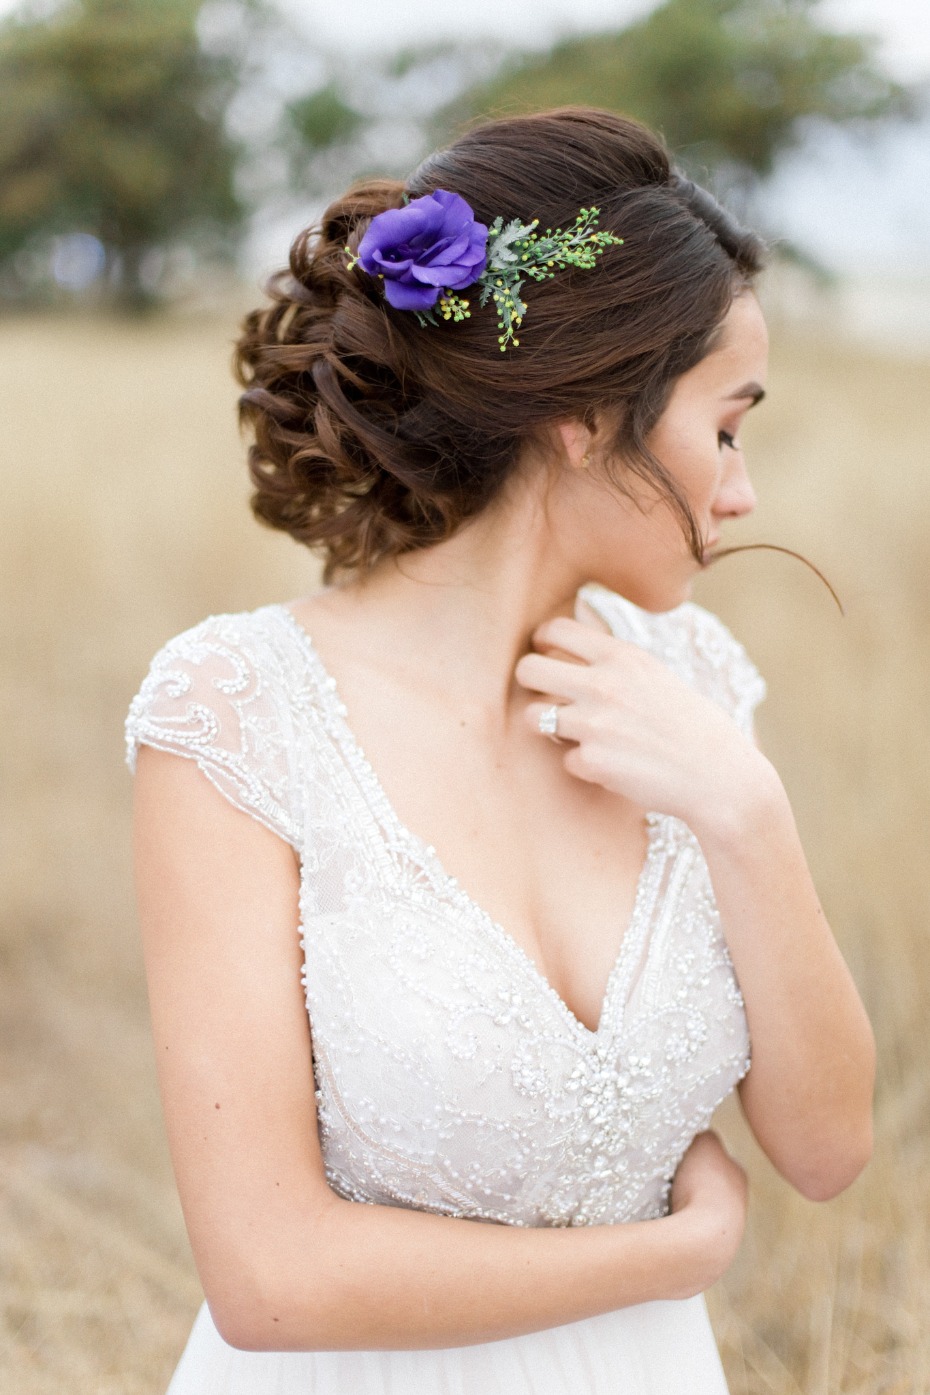 Beautiful hair with floral accessory